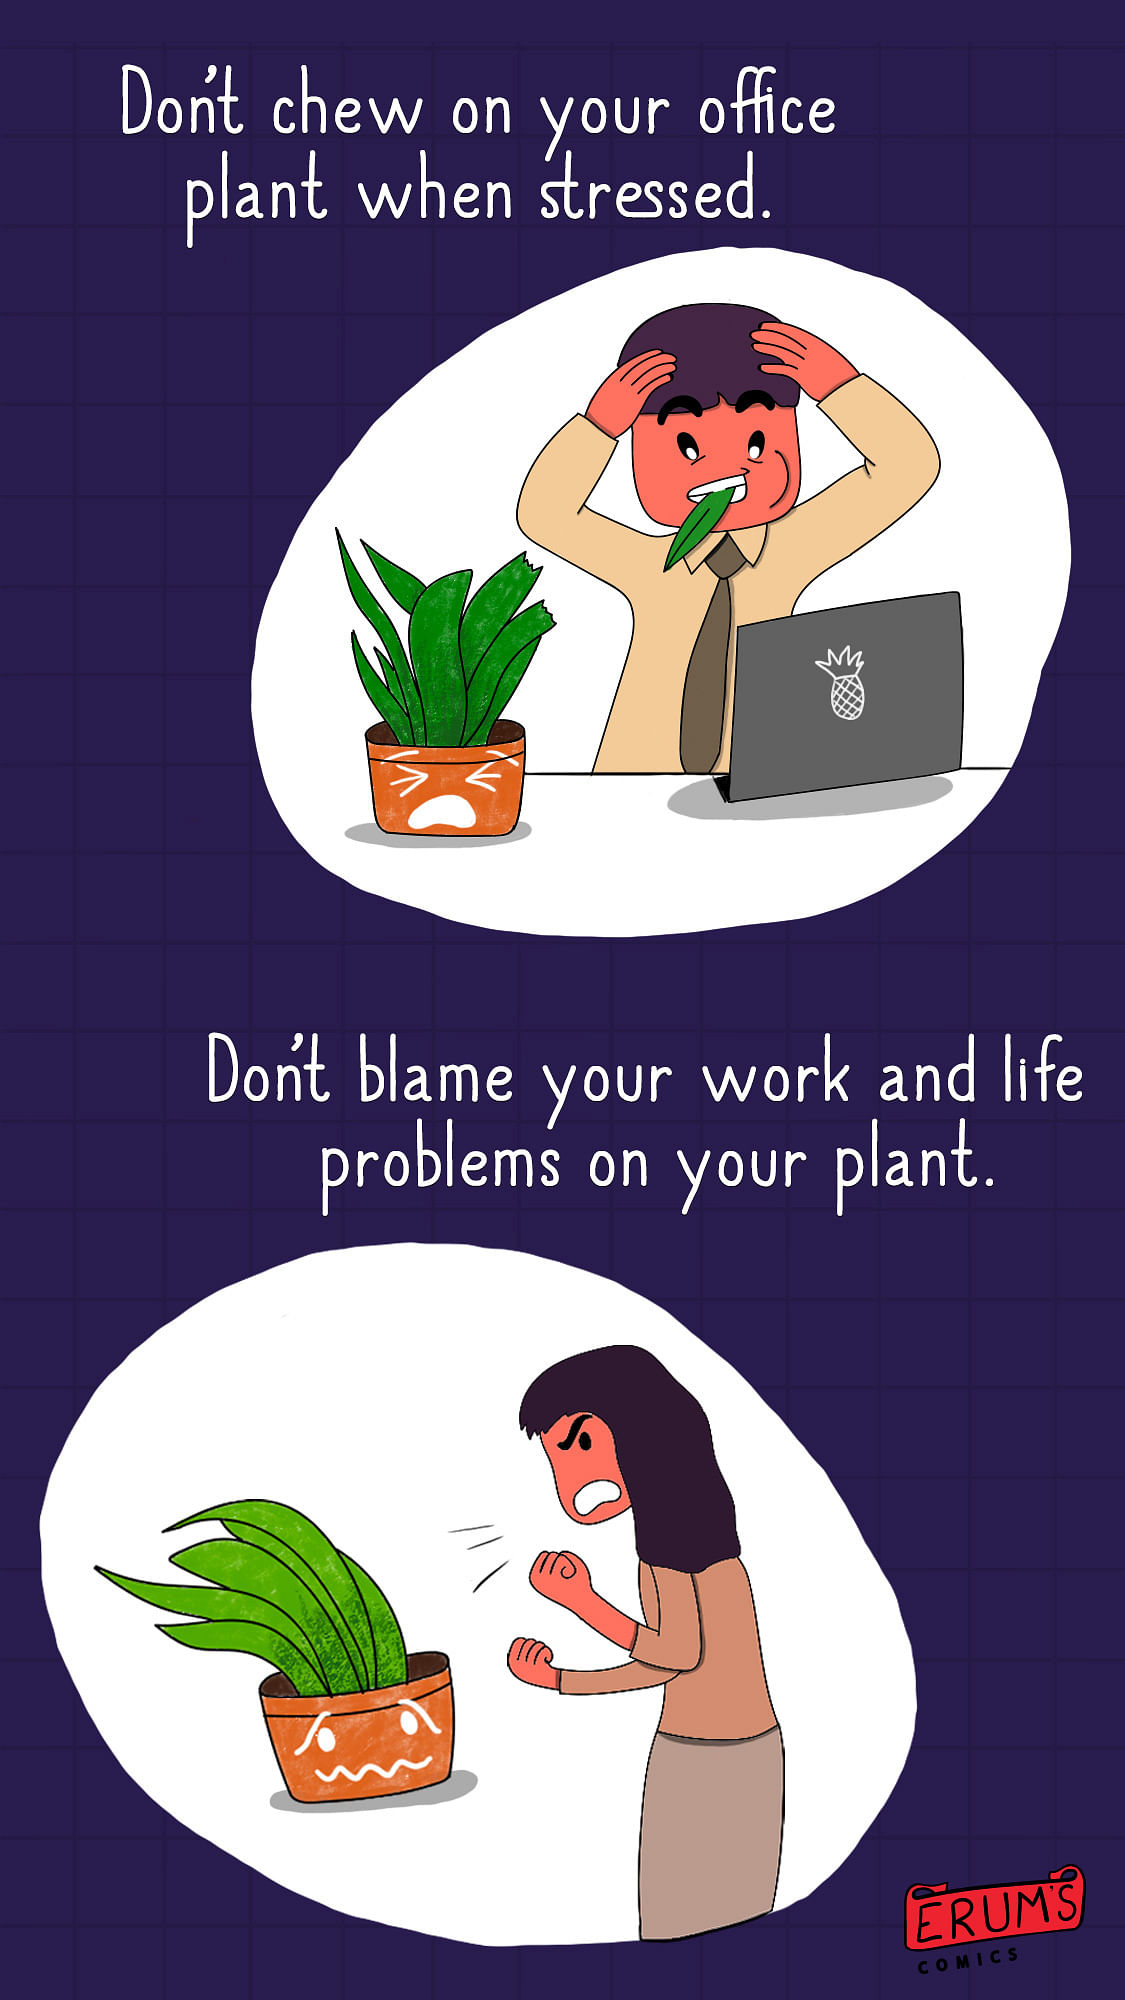 I think it’s time that we stopped ignoring our precious office plants.